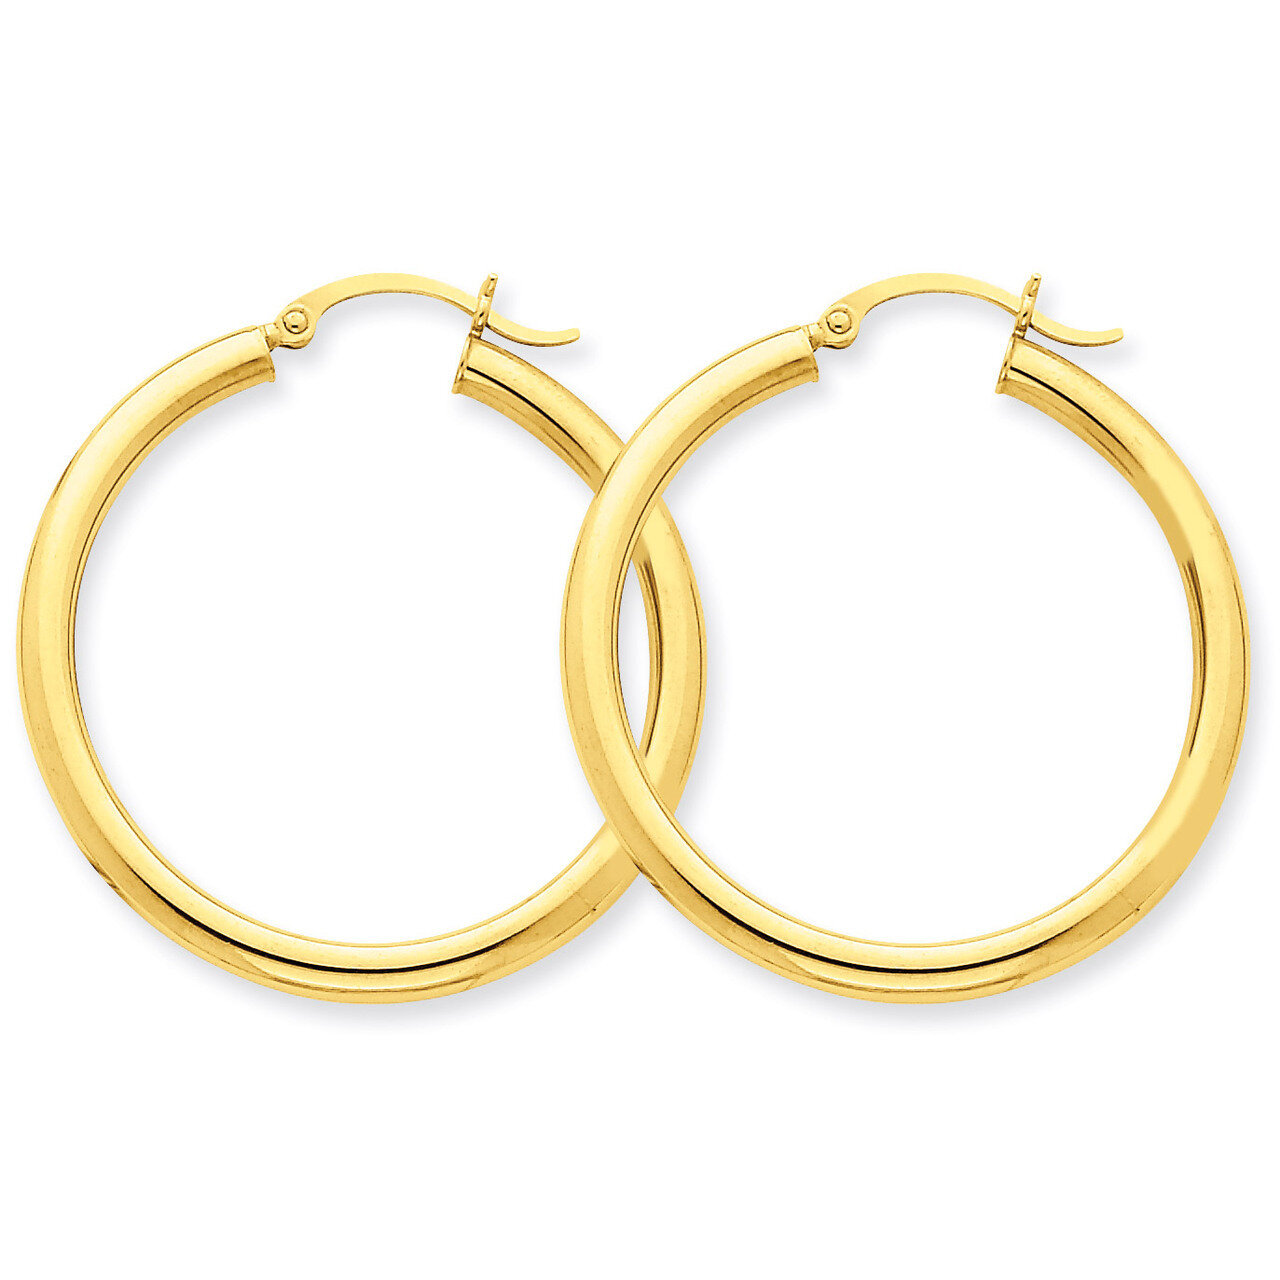 Polished 3mm Round Hoop Earrings 10k Gold 10T935